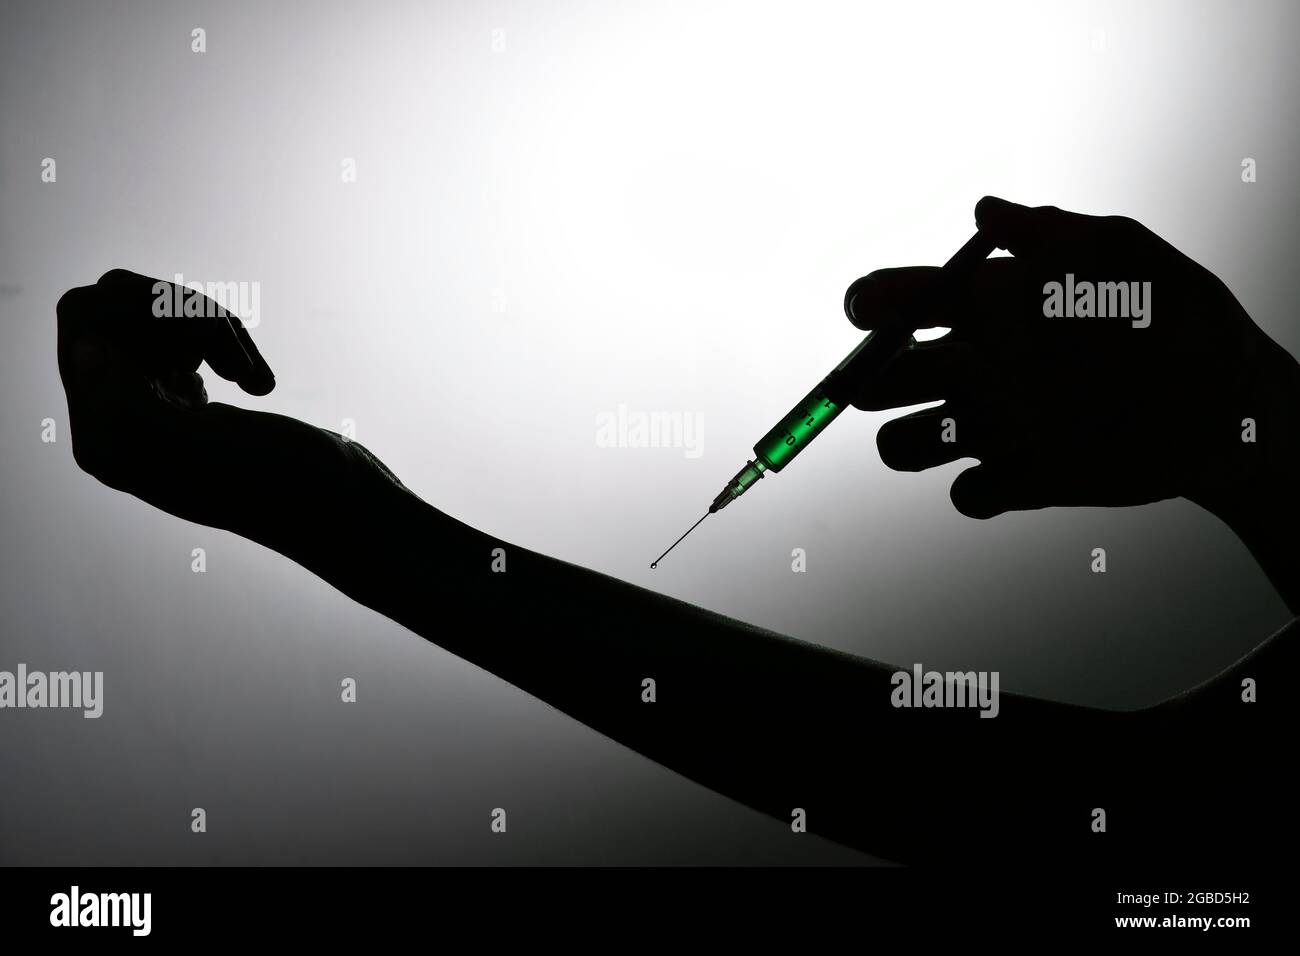 Injecting Drug In Hand, Drug Addiction Concept Stock Photo